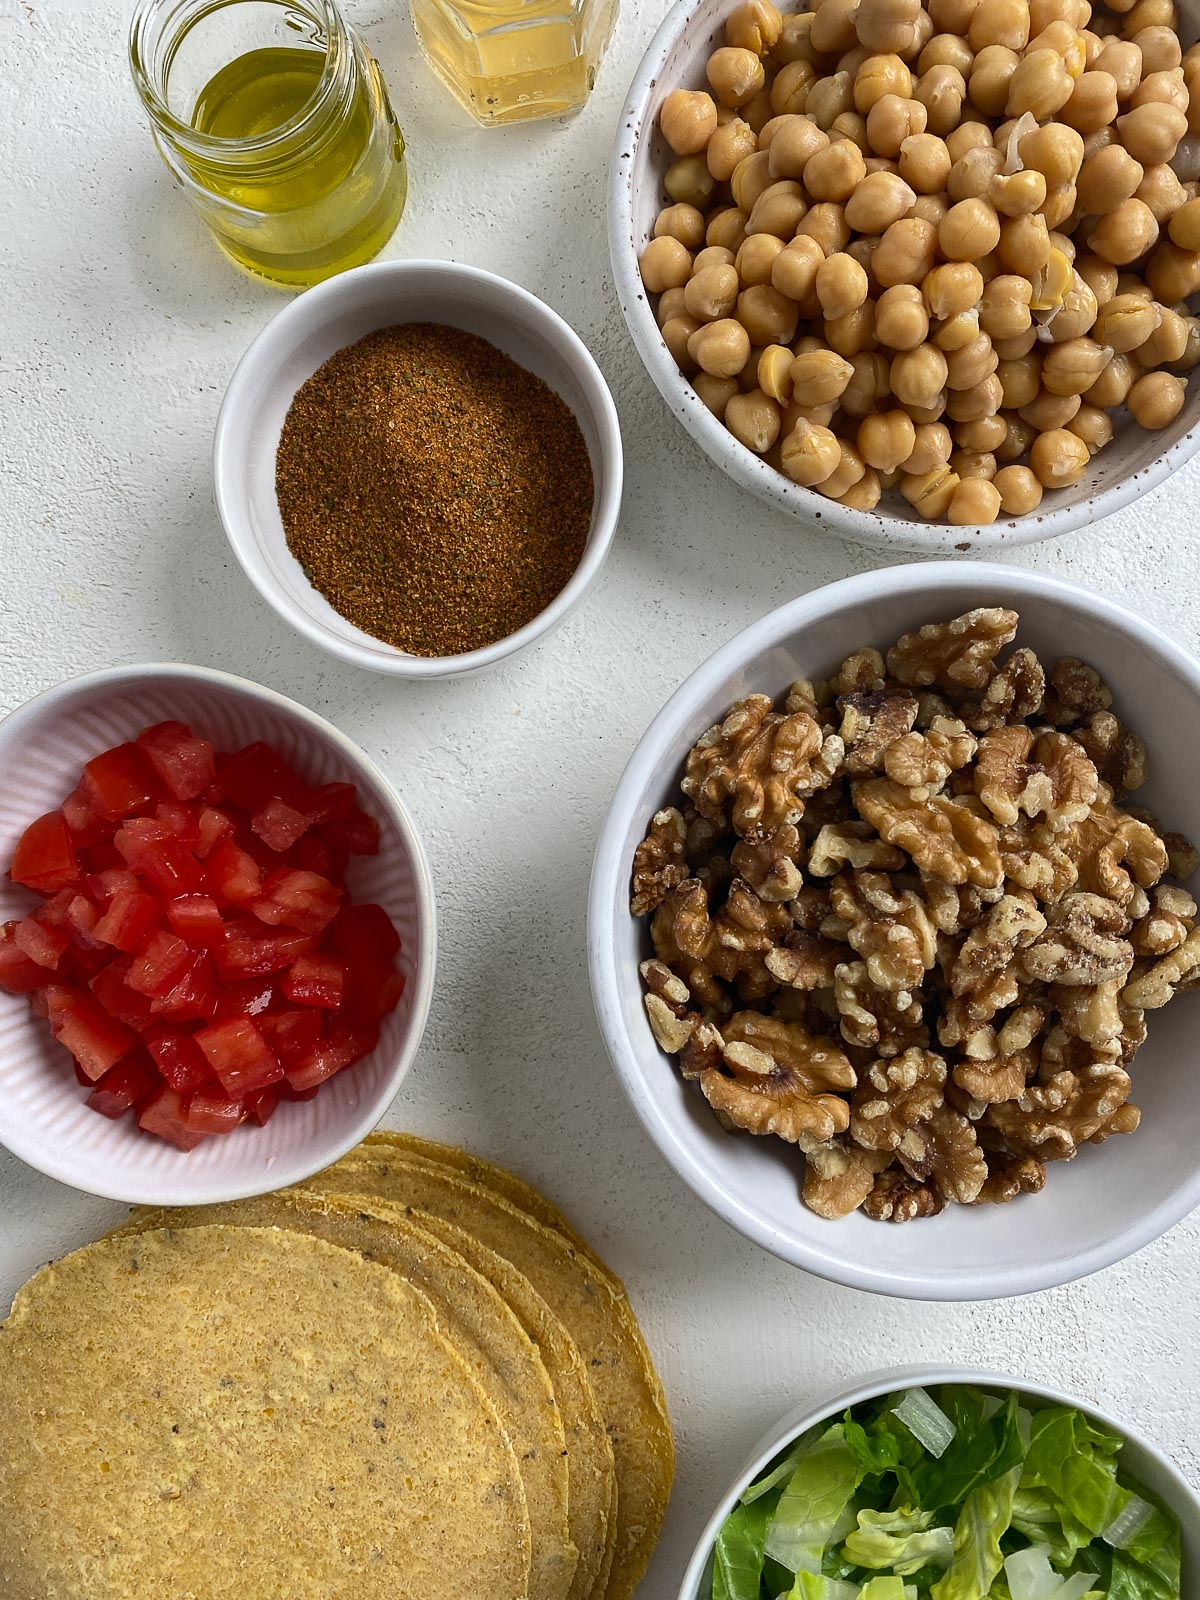 separate bowls of ingredients for chorizo tacos against a white background